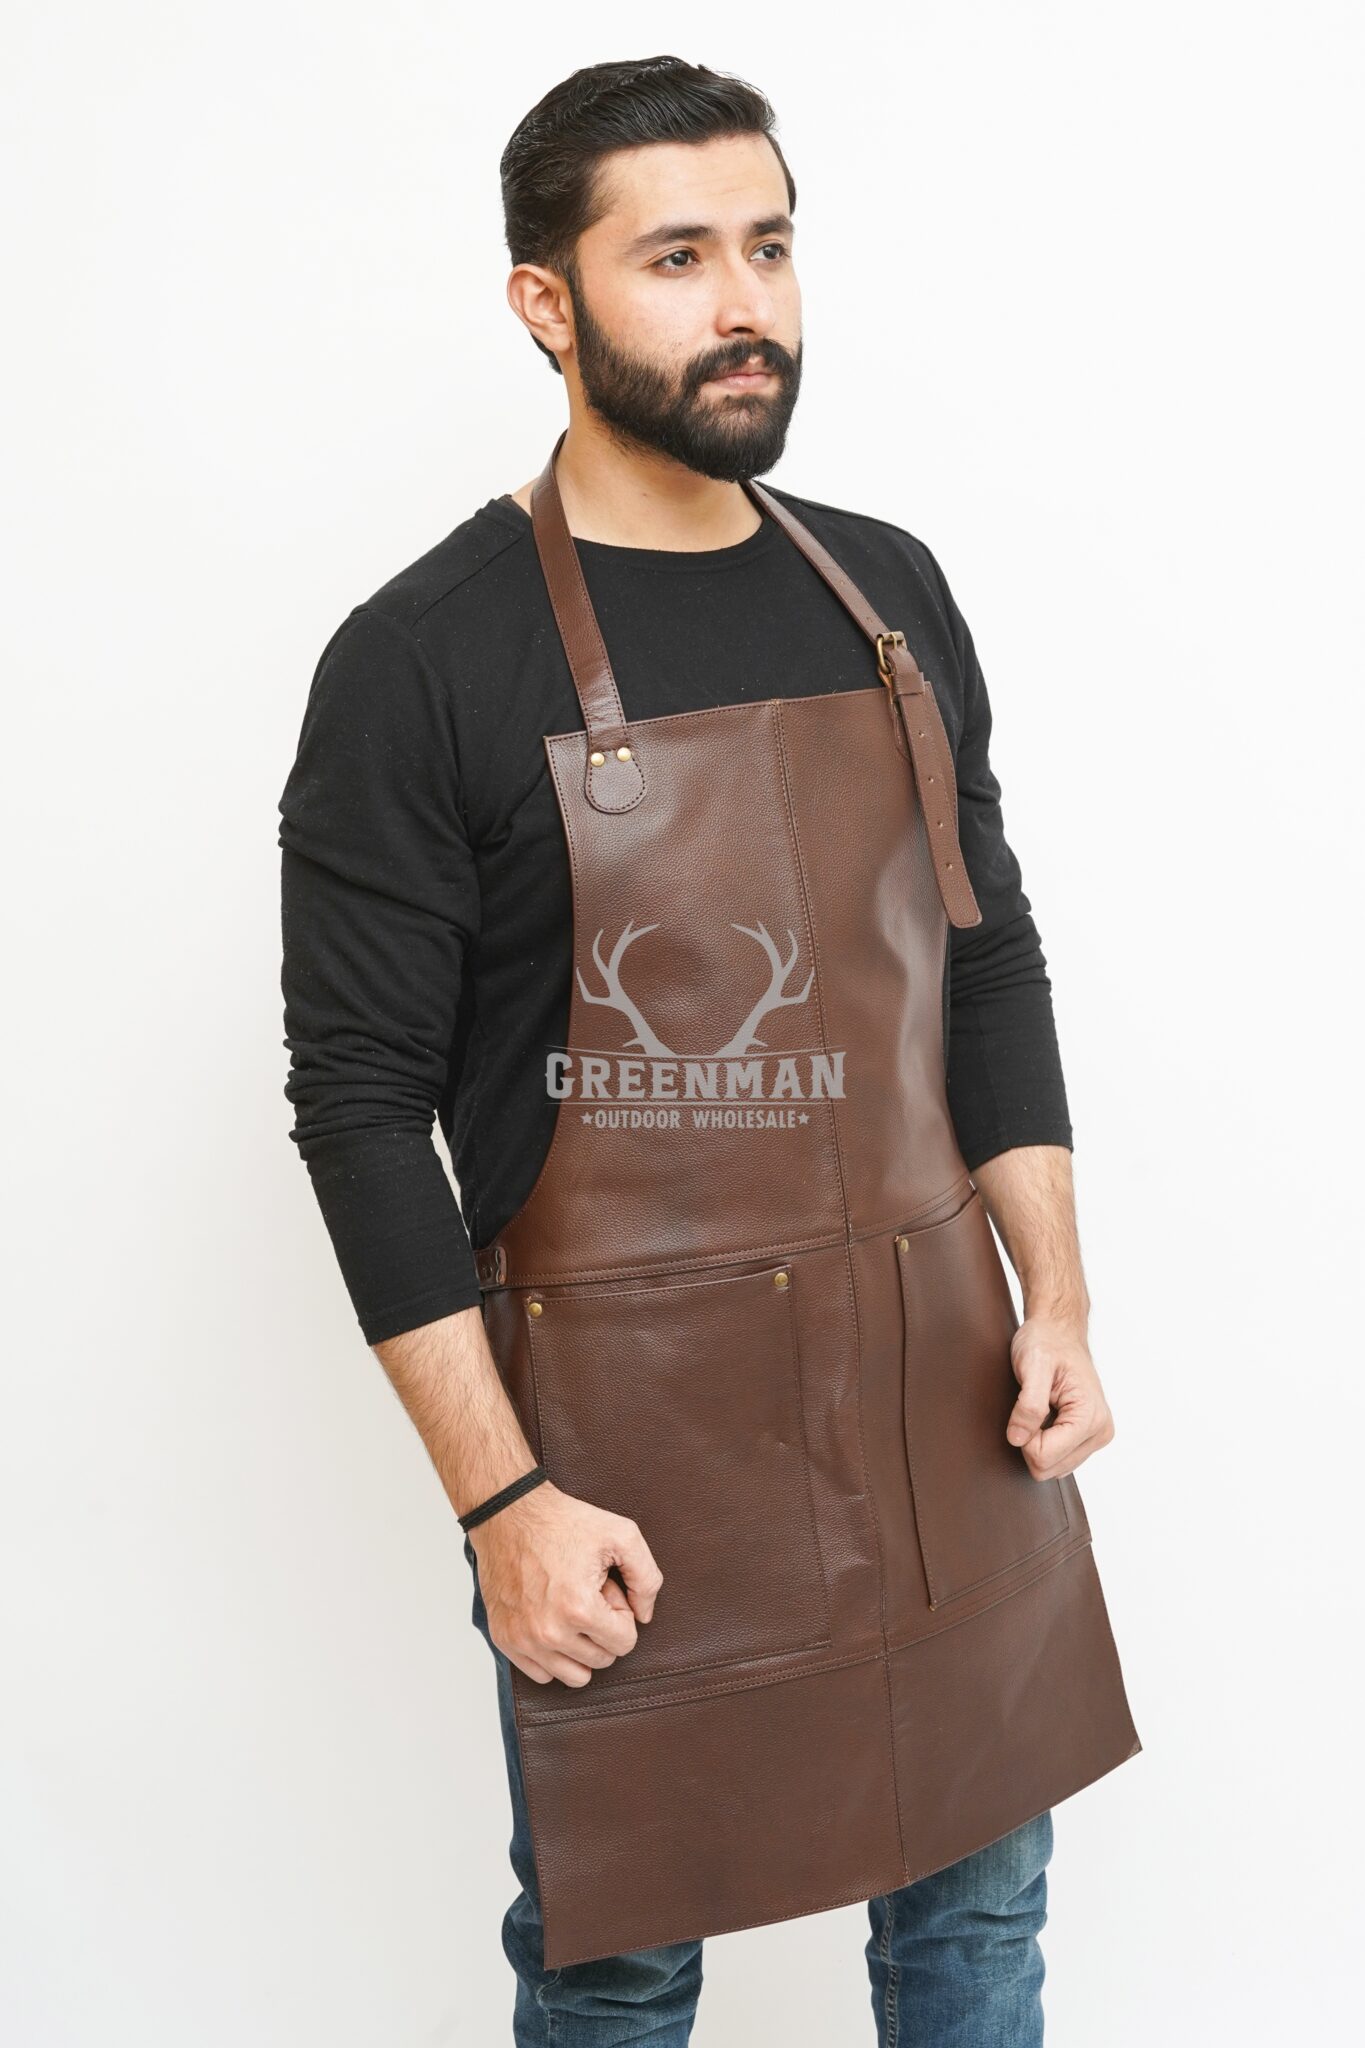 Leather Aprons, Leather Woodworking Apron, Leather Butcher Apron, Leather Chef Apron, Leather Blacksmith Apron, Leather Barber Apron, Leather BBQ Apron, Leather Carpenters Apron, Leather Welding Apron,